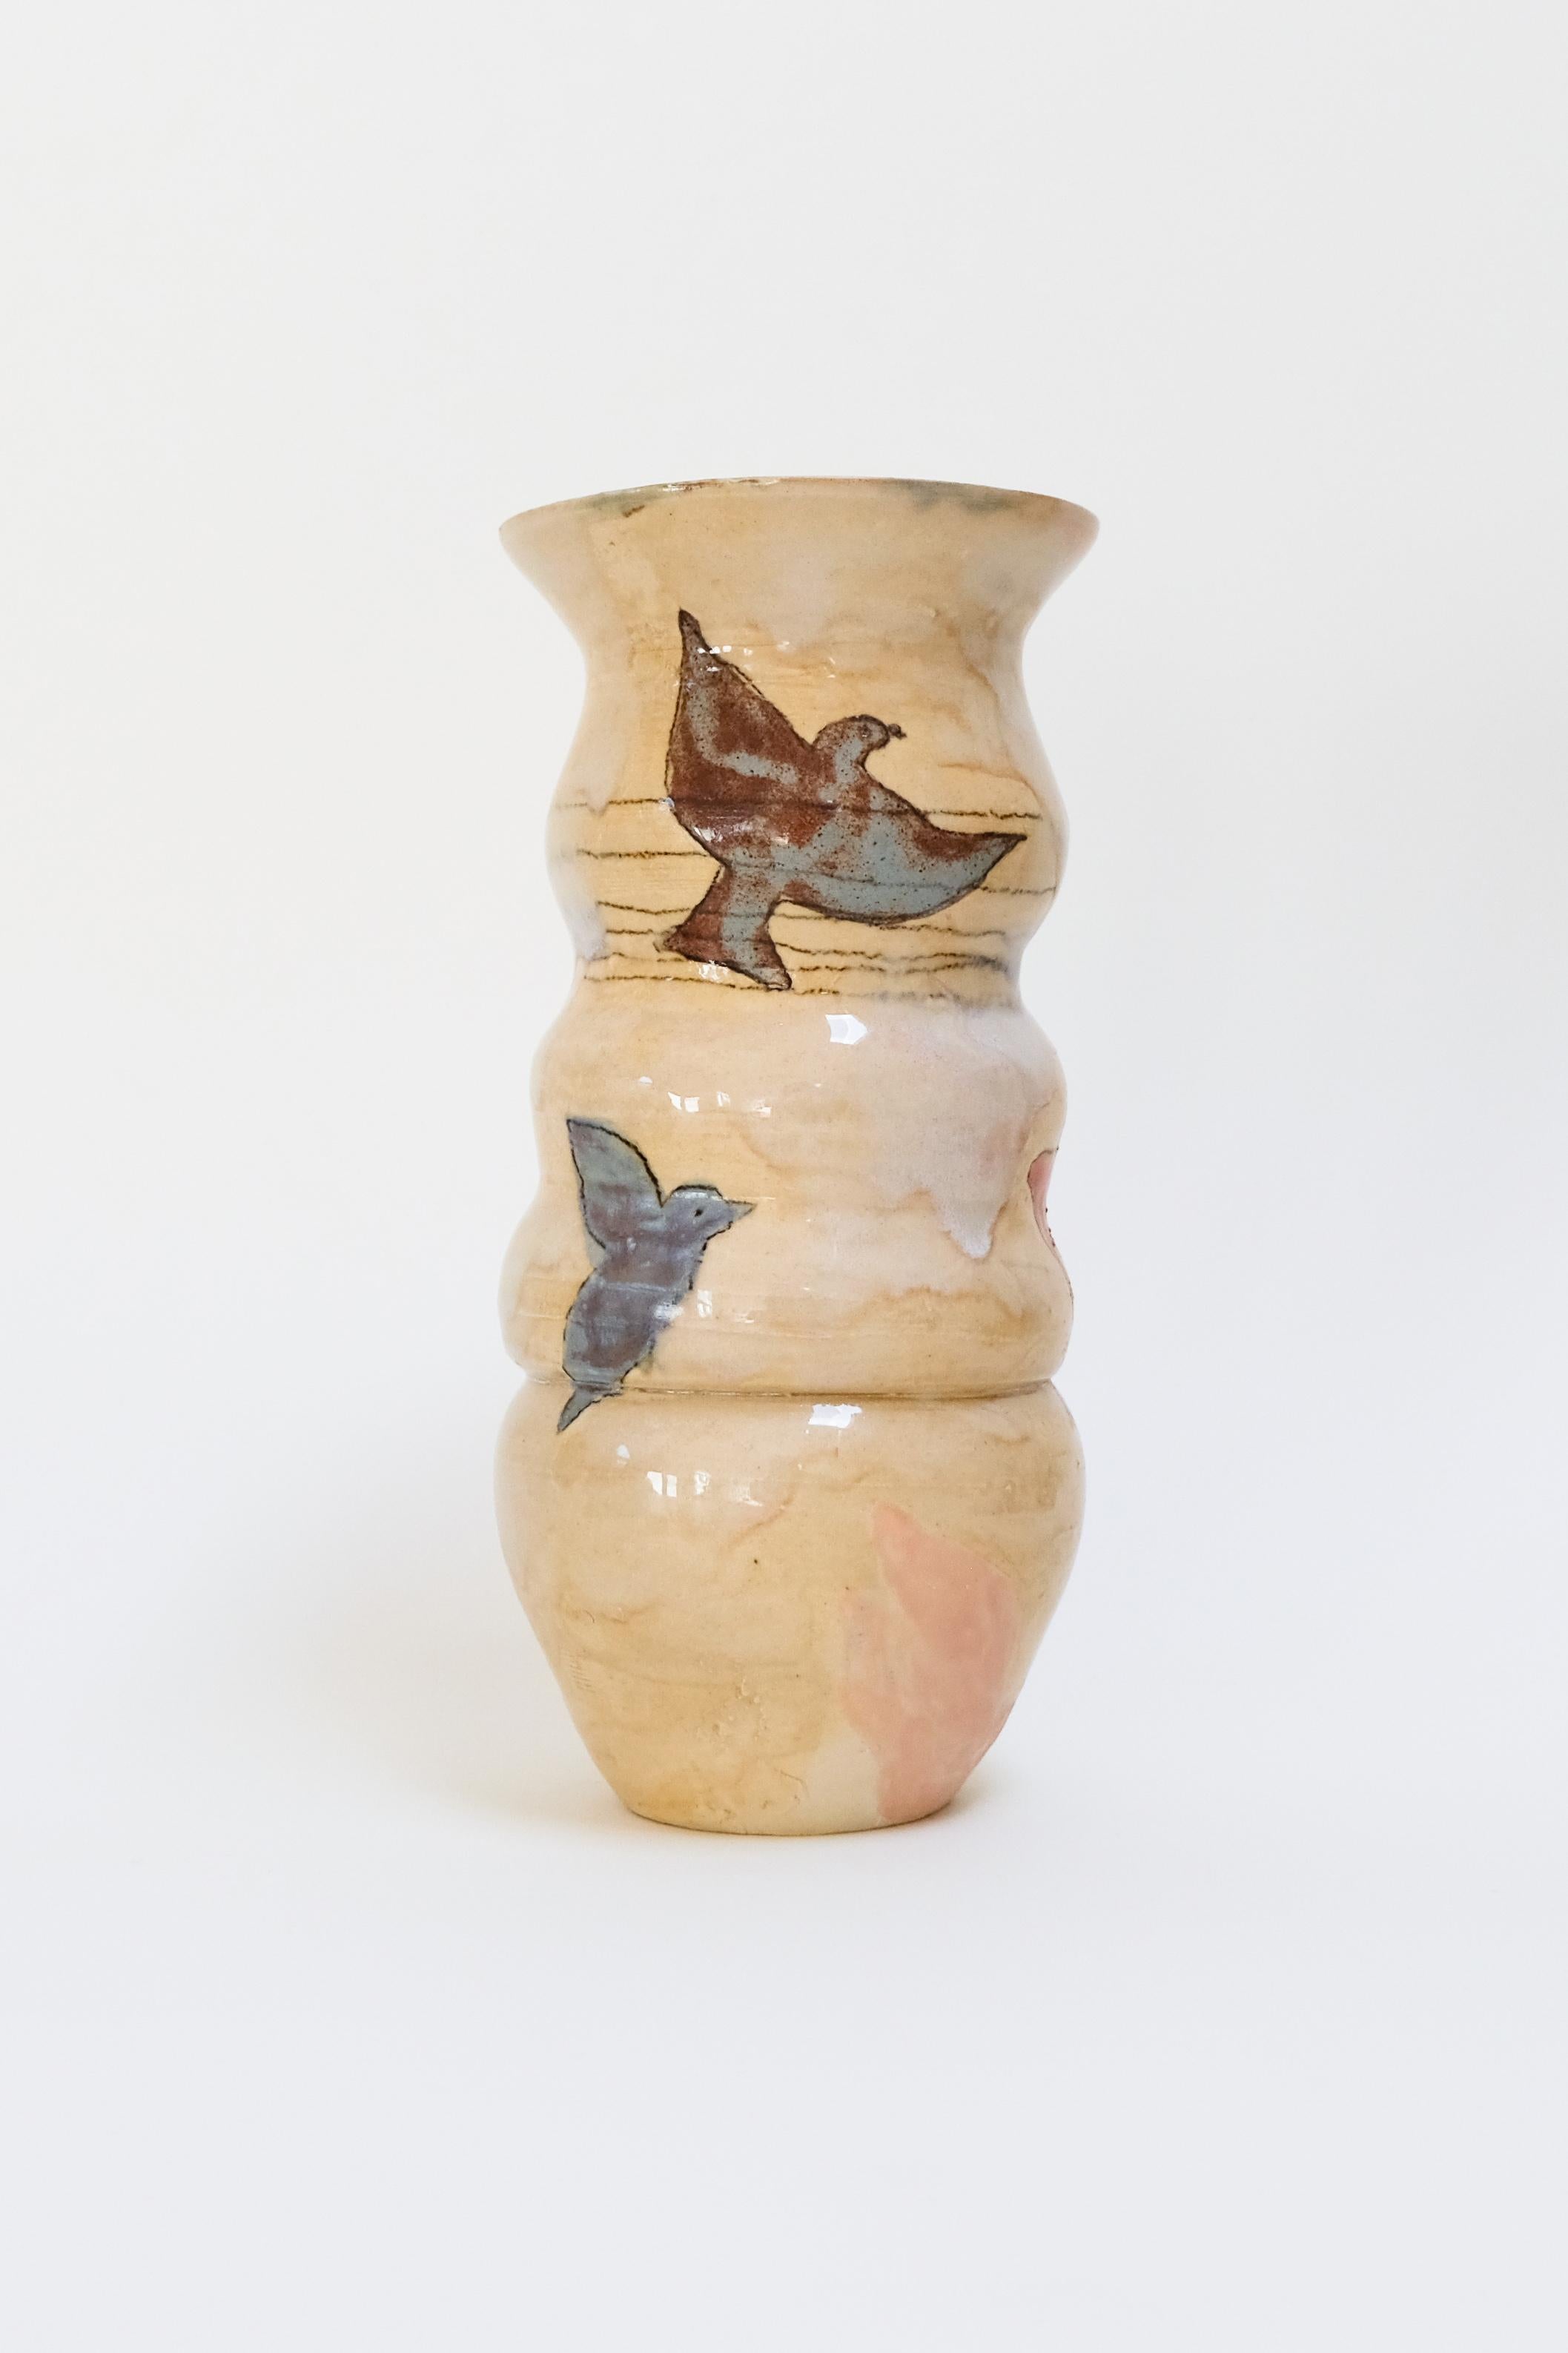 Wade Pigeons - contemporary warm ceramic vase with bird design, functional - Sculpture by Misbah Ahmed